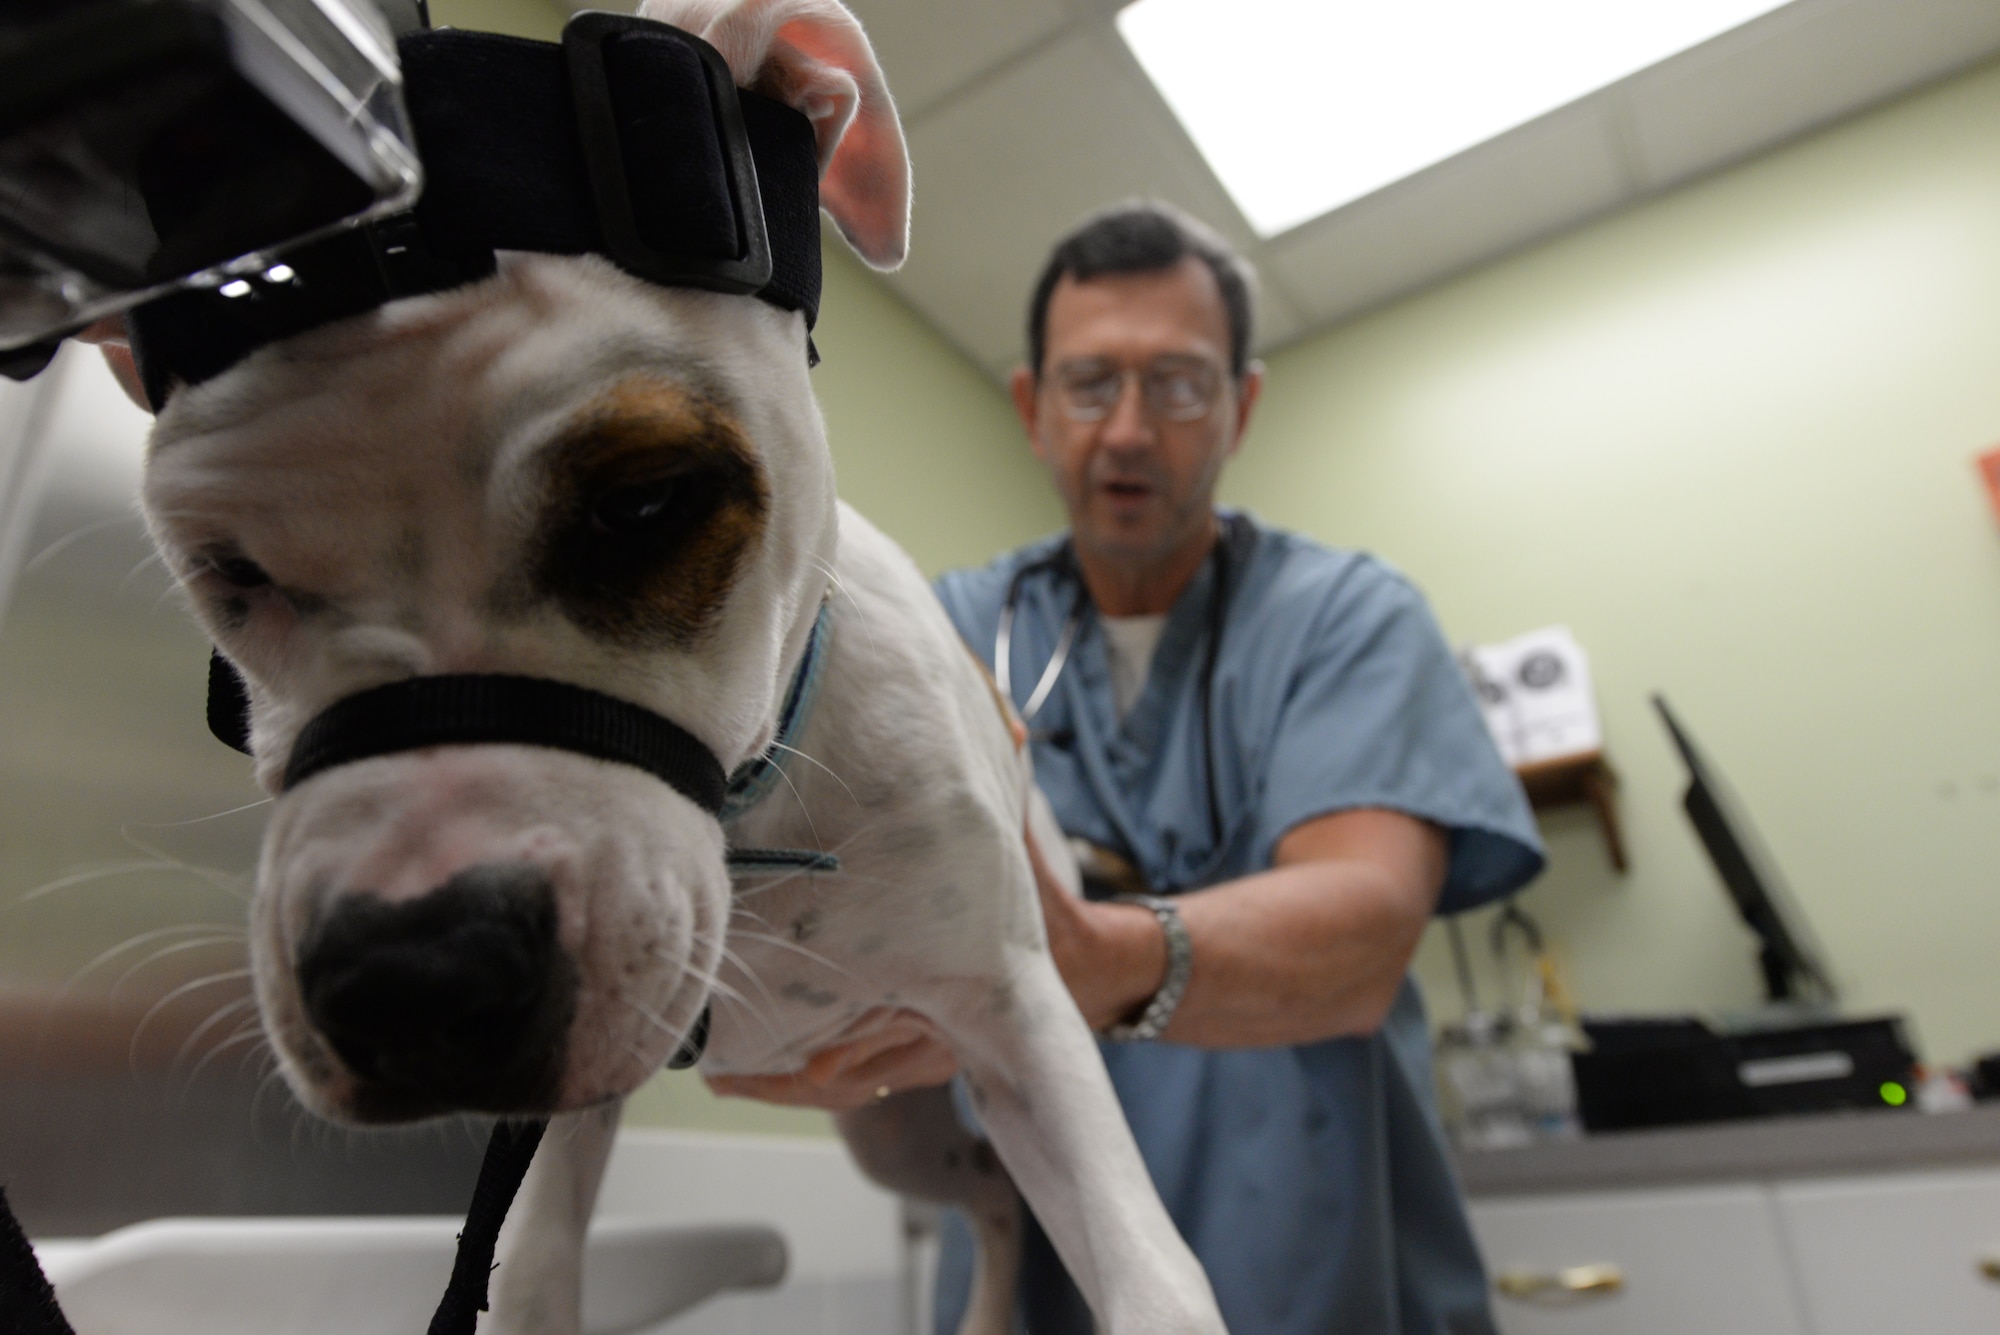 Dr. Andrew Bradley, Maxwell Veterinary Clinic veterinarian, provides a routine check-up for Chief Master Sgt. Elizabeth Carty’s, 42d Air Base Wing Public Affairs superintendent, dog Gus at the Maxwell Veterinary Clinic Oct. 3, 2015, at Maxwell Air Force Base, Alabama. A routine check-up includes examining temperature, pulse and basic vitals as well as lymph nodes and joints. The veterinary clinic also offers flea, tick and heartworm preventatives as needed. (U.S. Air Force photo illustration by Airman 1st Class Alexa Culbert) 